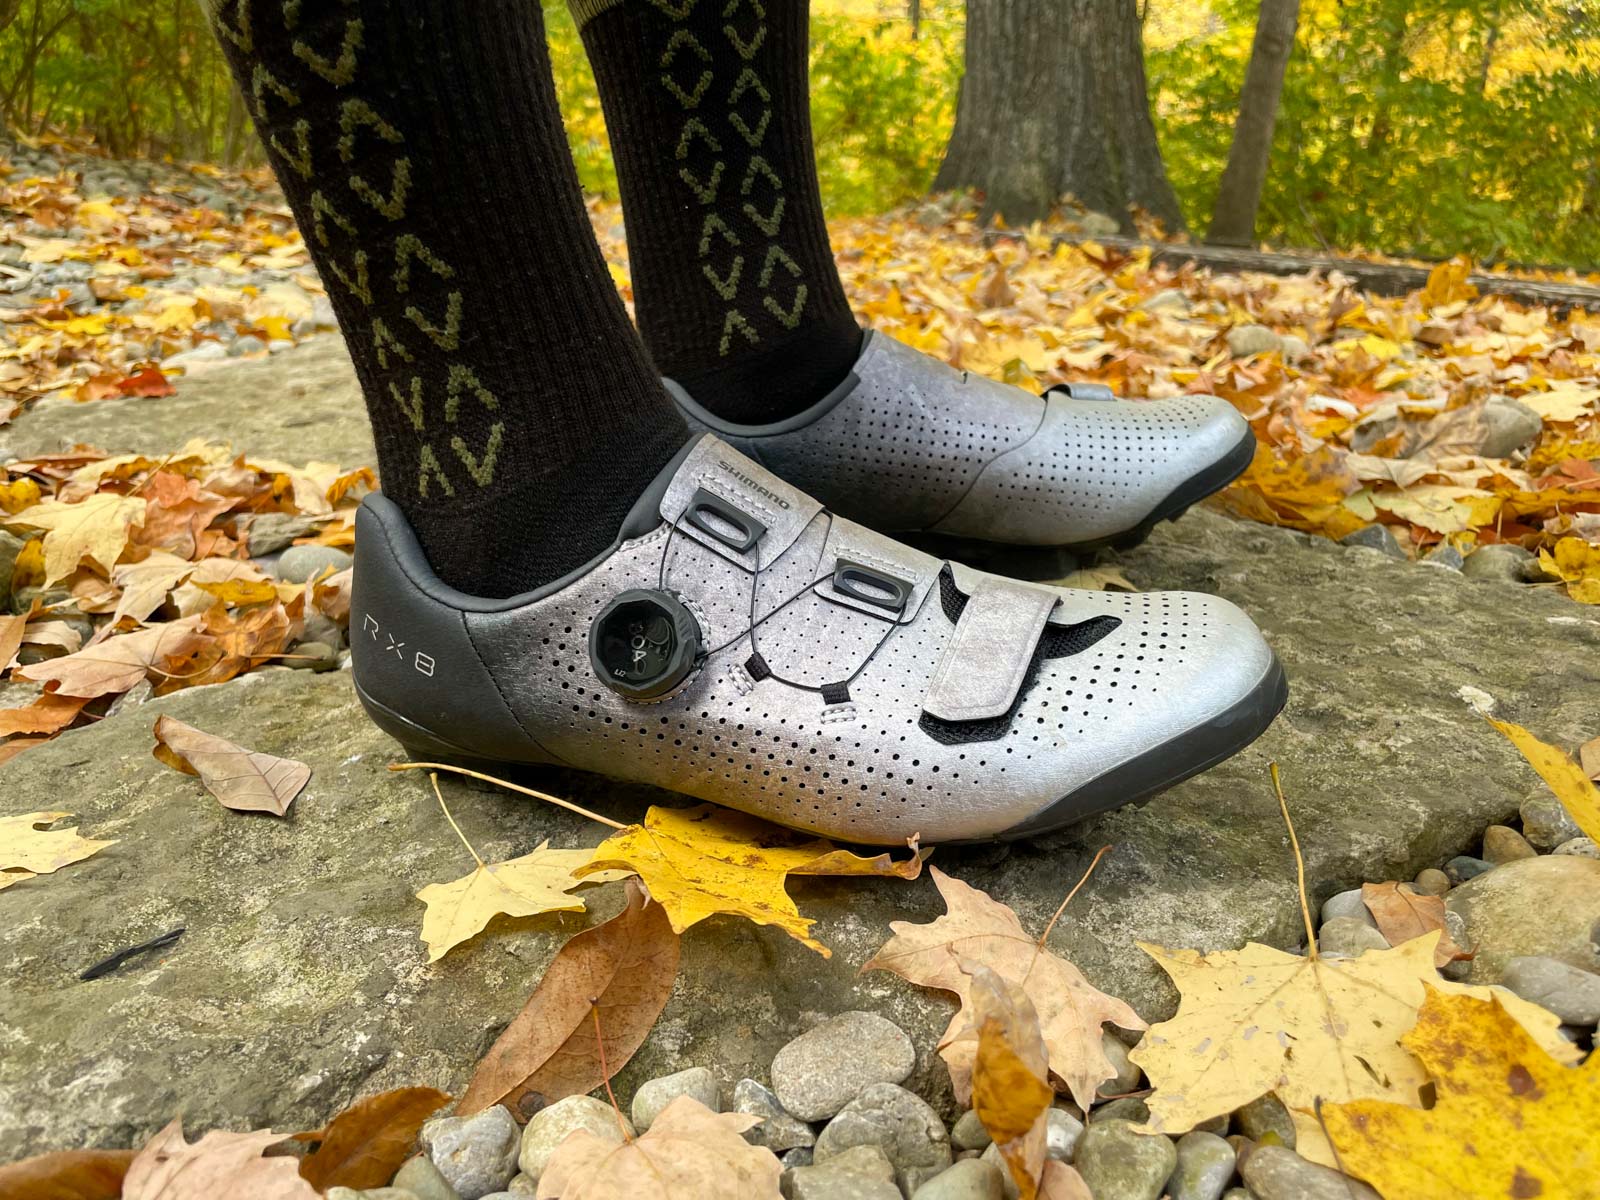 Shimano RX801 gravel shoe first impressions